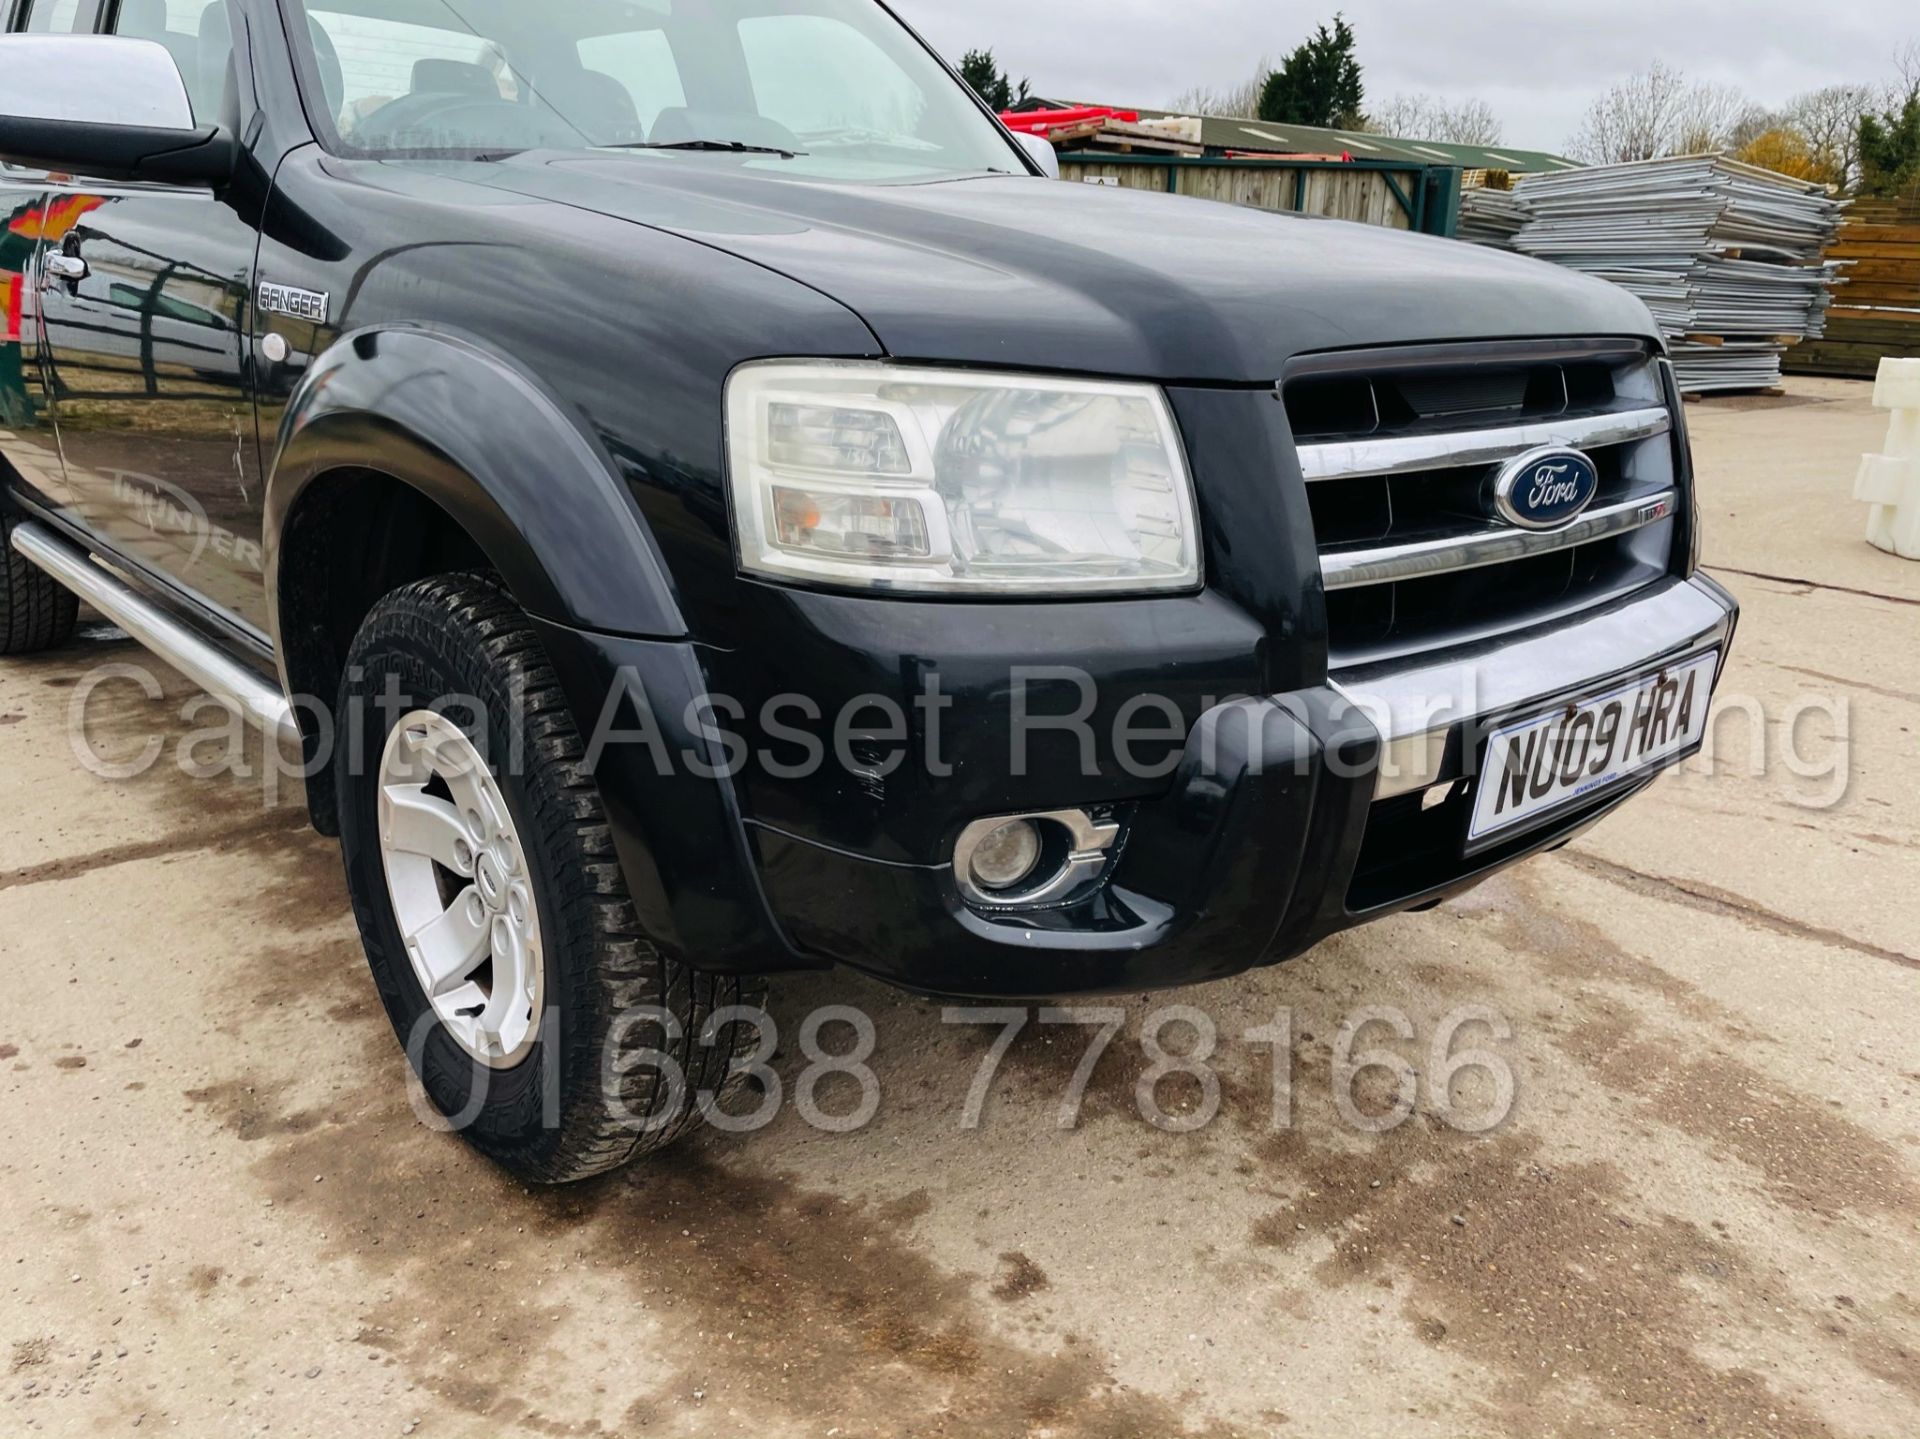 ON SALE FORD RANGER *THUNDER* DOUBLE CAB 4X4 PICK-UP (2009) '2.5 TDCI - 1 *LEATHER - A/C* (NO VAT) - Image 16 of 40